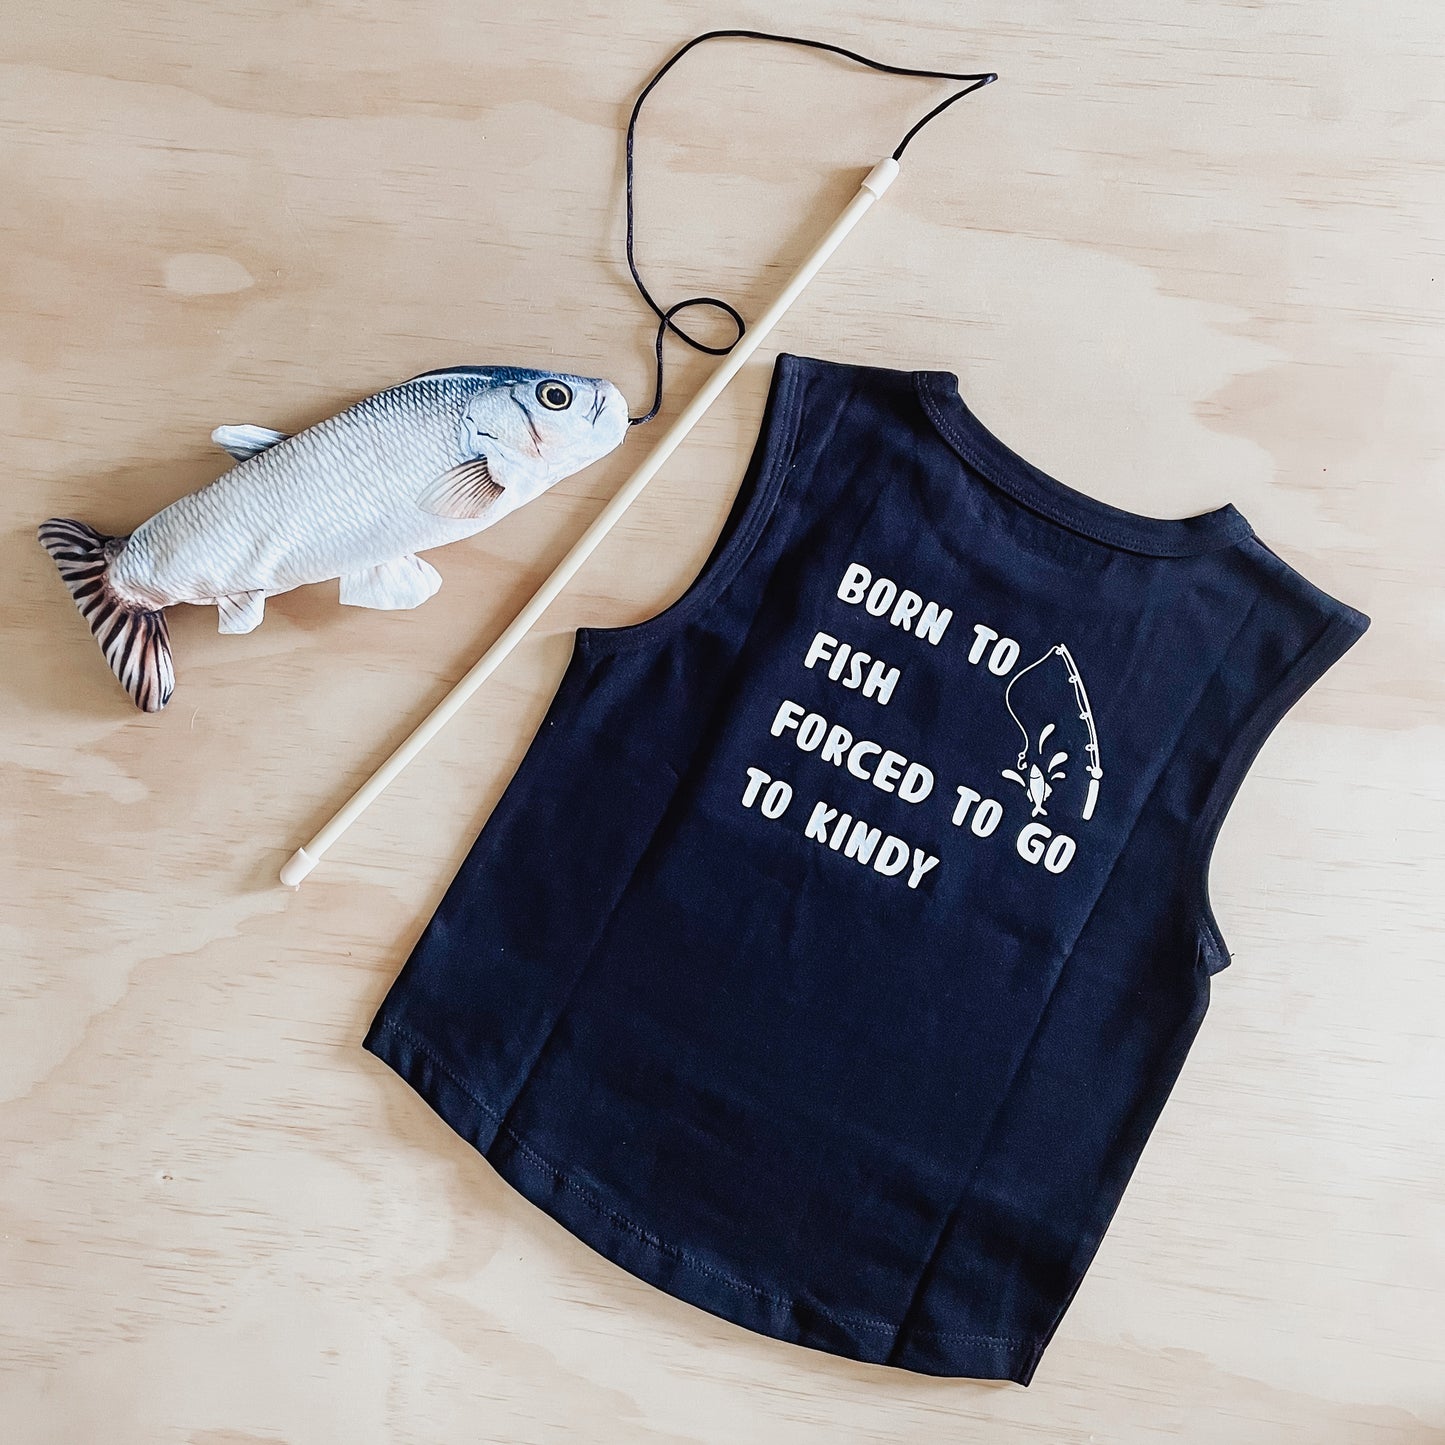 Born to fish, Forced to go to Kindy Muscle Tee :: black - Tully and the Chief